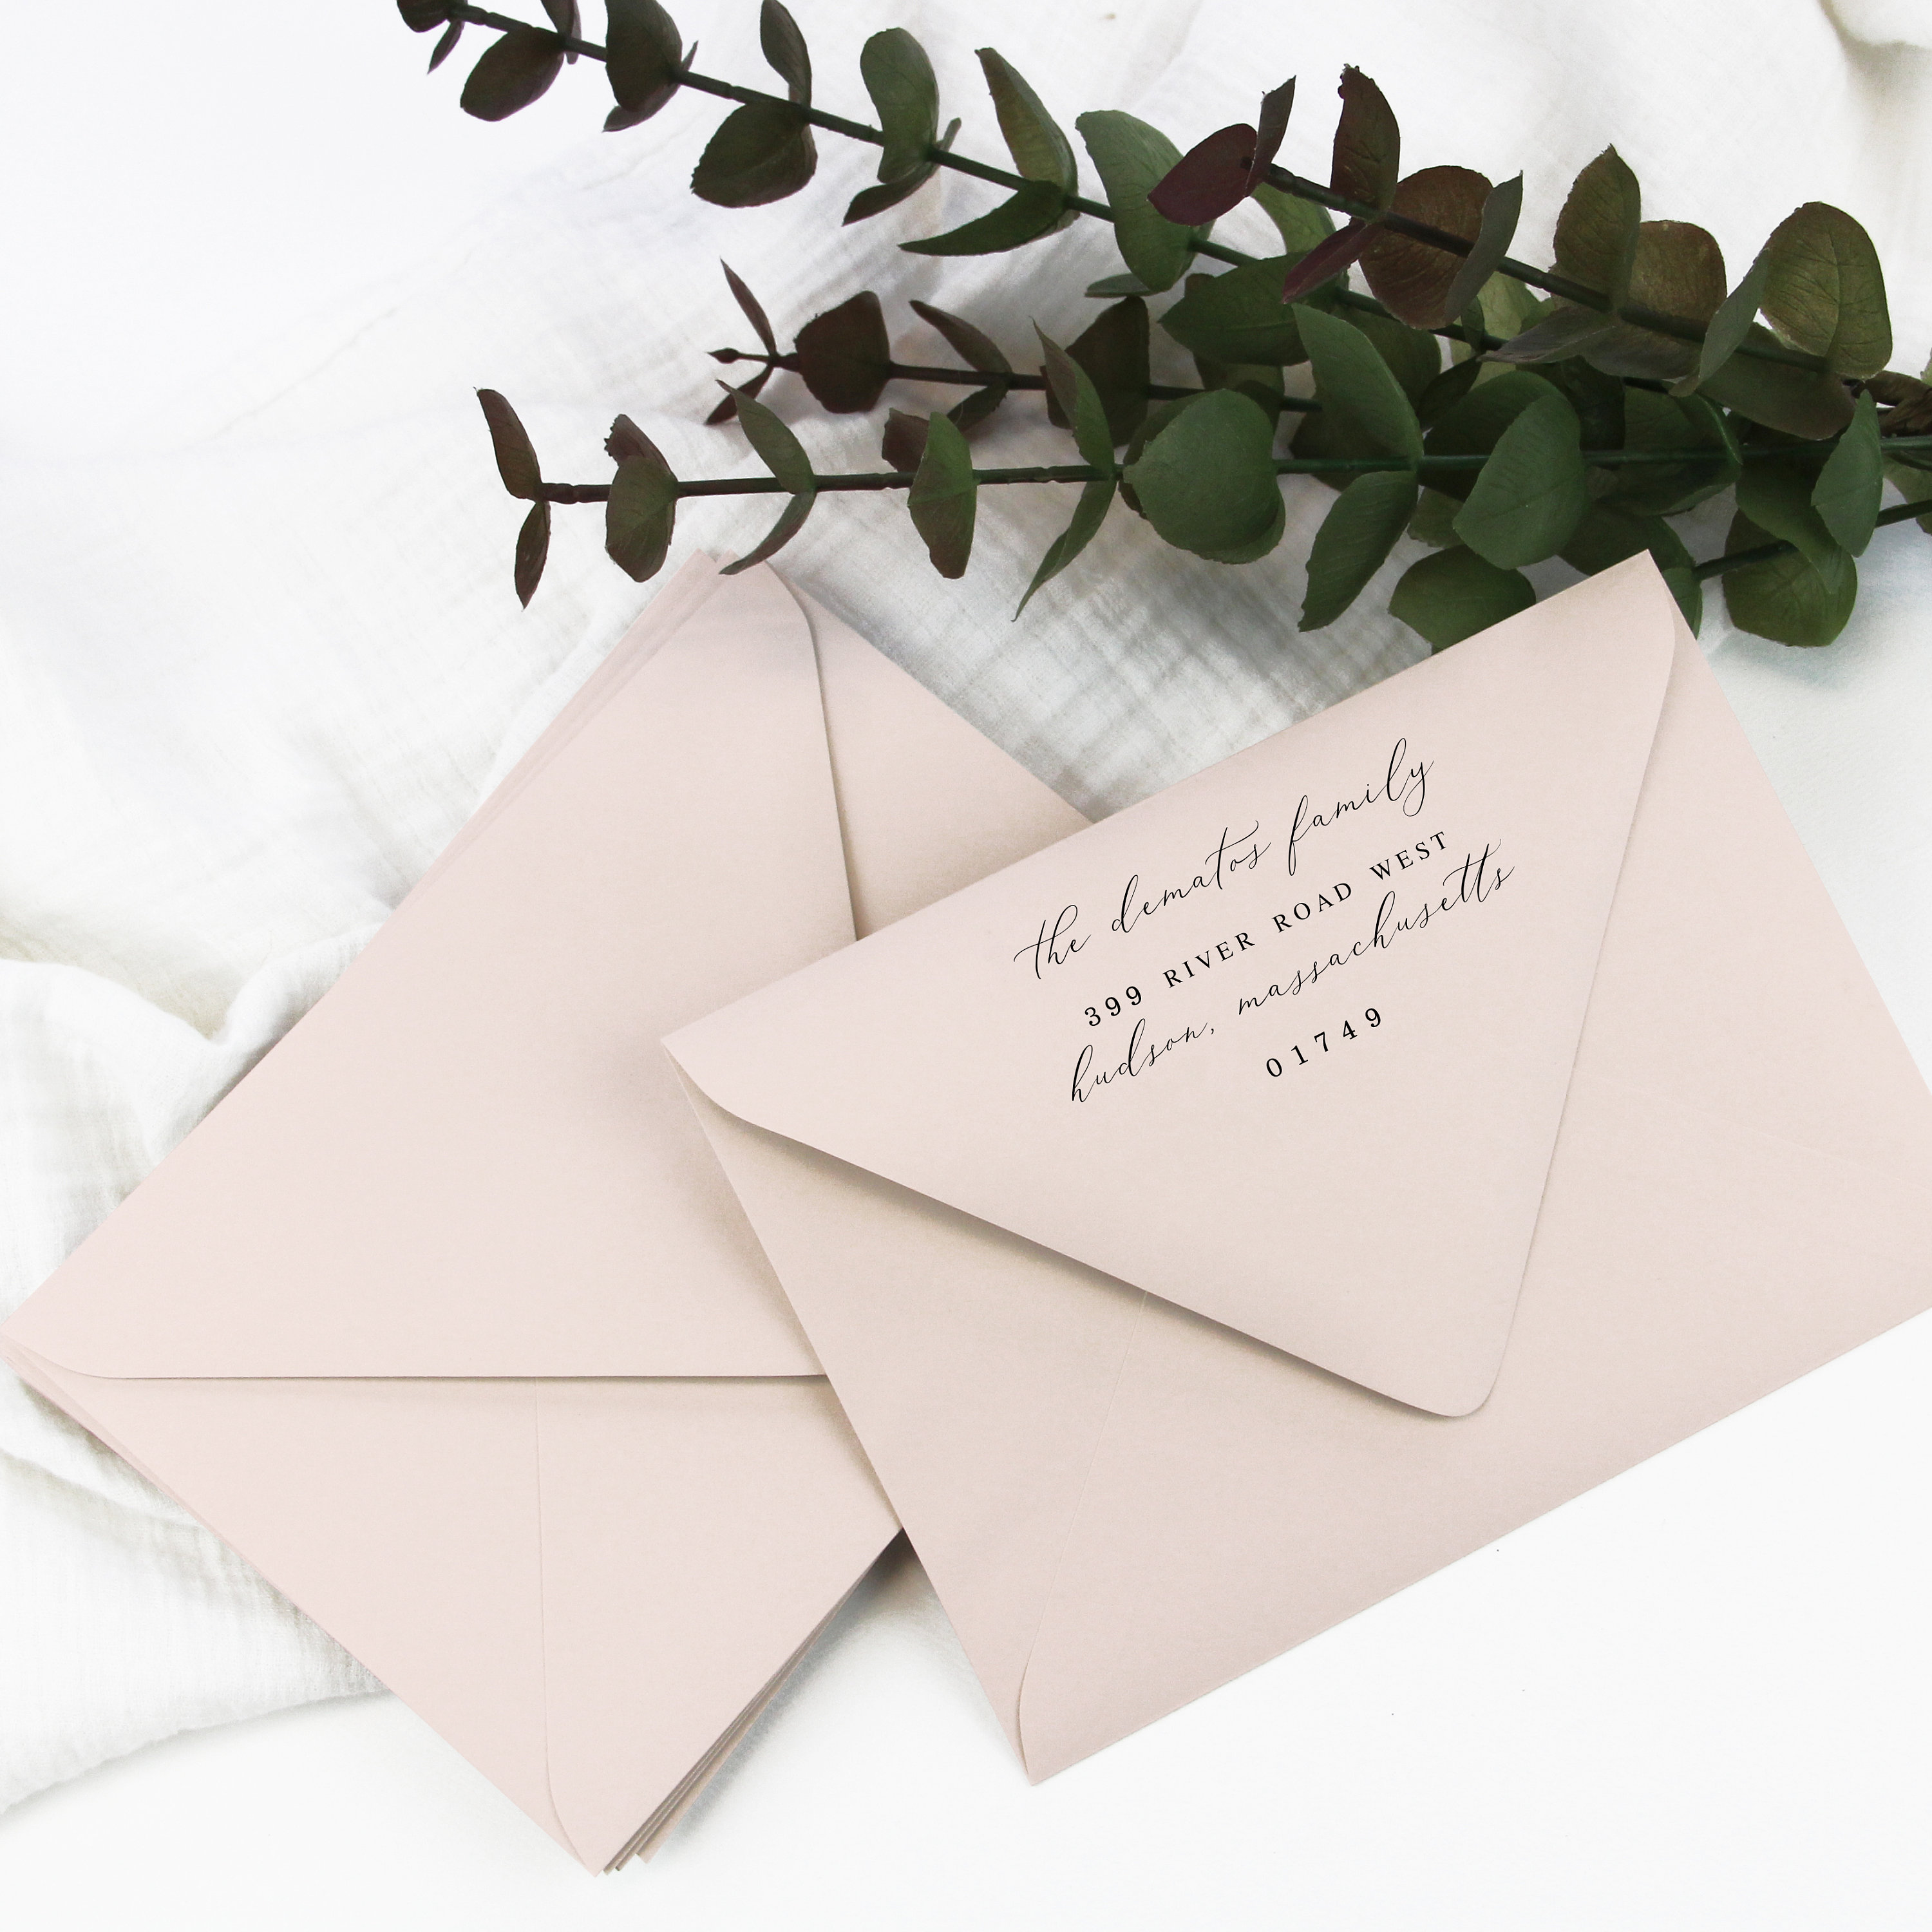 5x7 Envelopes for Invitations, 40-Pack A7 Envelopes for 5x7 Cards, Colored  Invitation Envelopes, Pink, 5 1/4 x 7 1/4 Inches